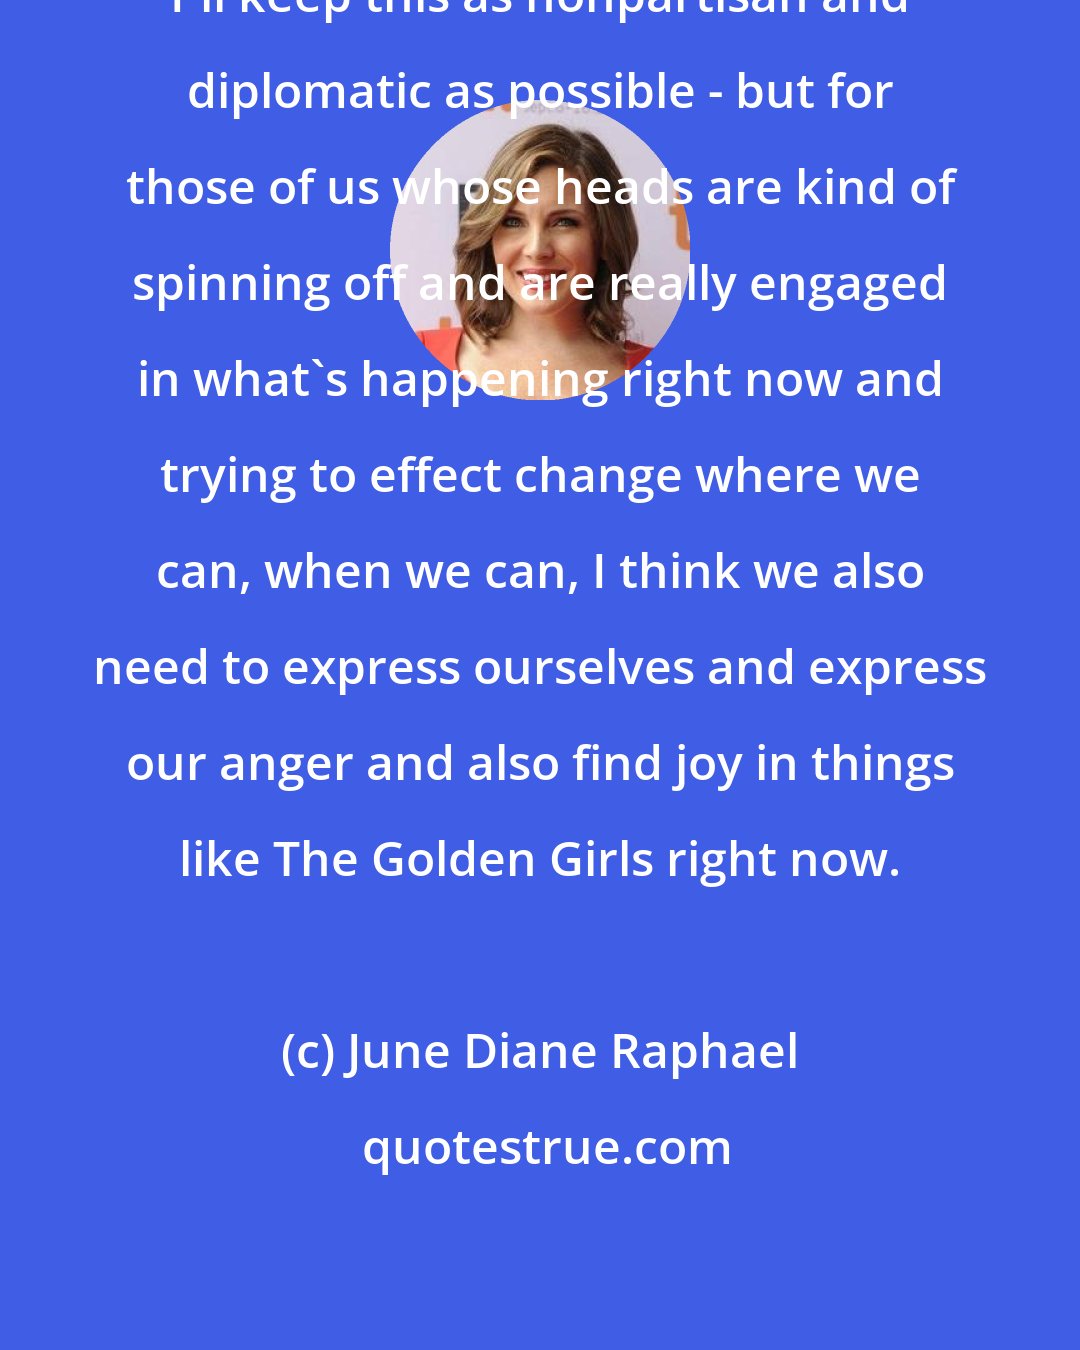 June Diane Raphael: I'll keep this as nonpartisan and diplomatic as possible - but for those of us whose heads are kind of spinning off and are really engaged in what's happening right now and trying to effect change where we can, when we can, I think we also need to express ourselves and express our anger and also find joy in things like The Golden Girls right now.